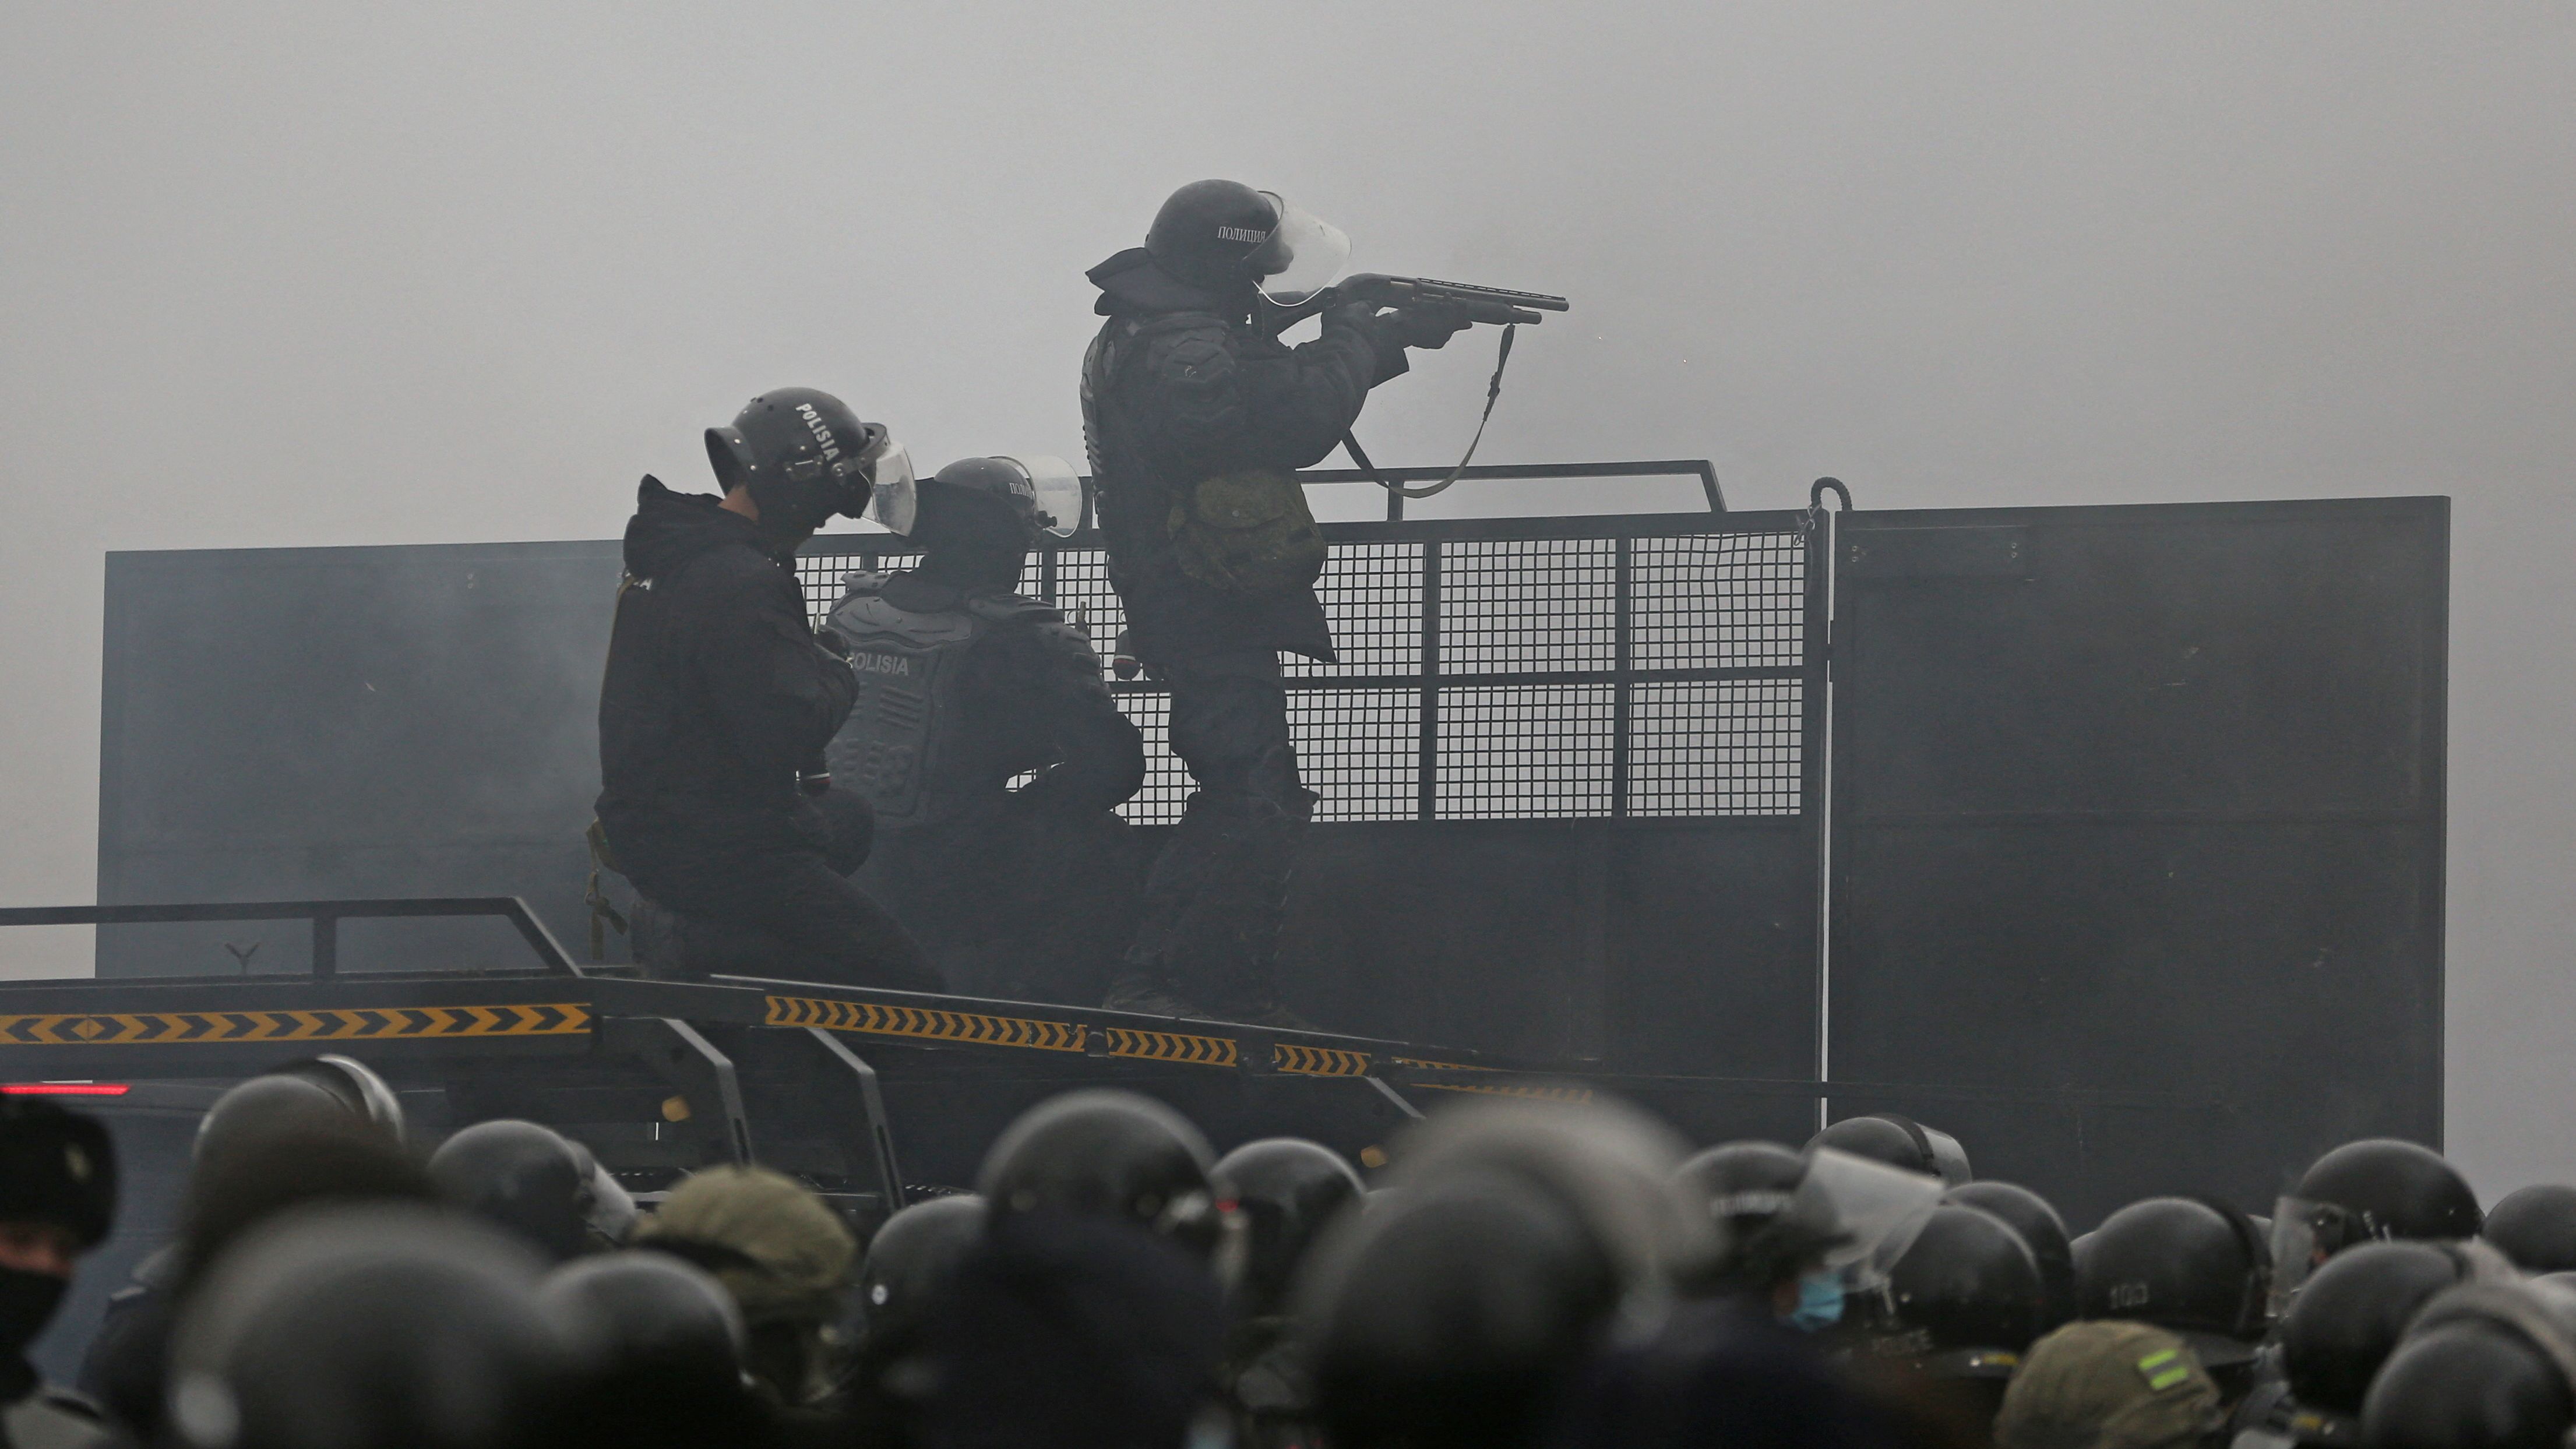 Kazakh law enforcement officers are seen on a barricade during a protest triggered by fuel price increase in Almaty on January 5.